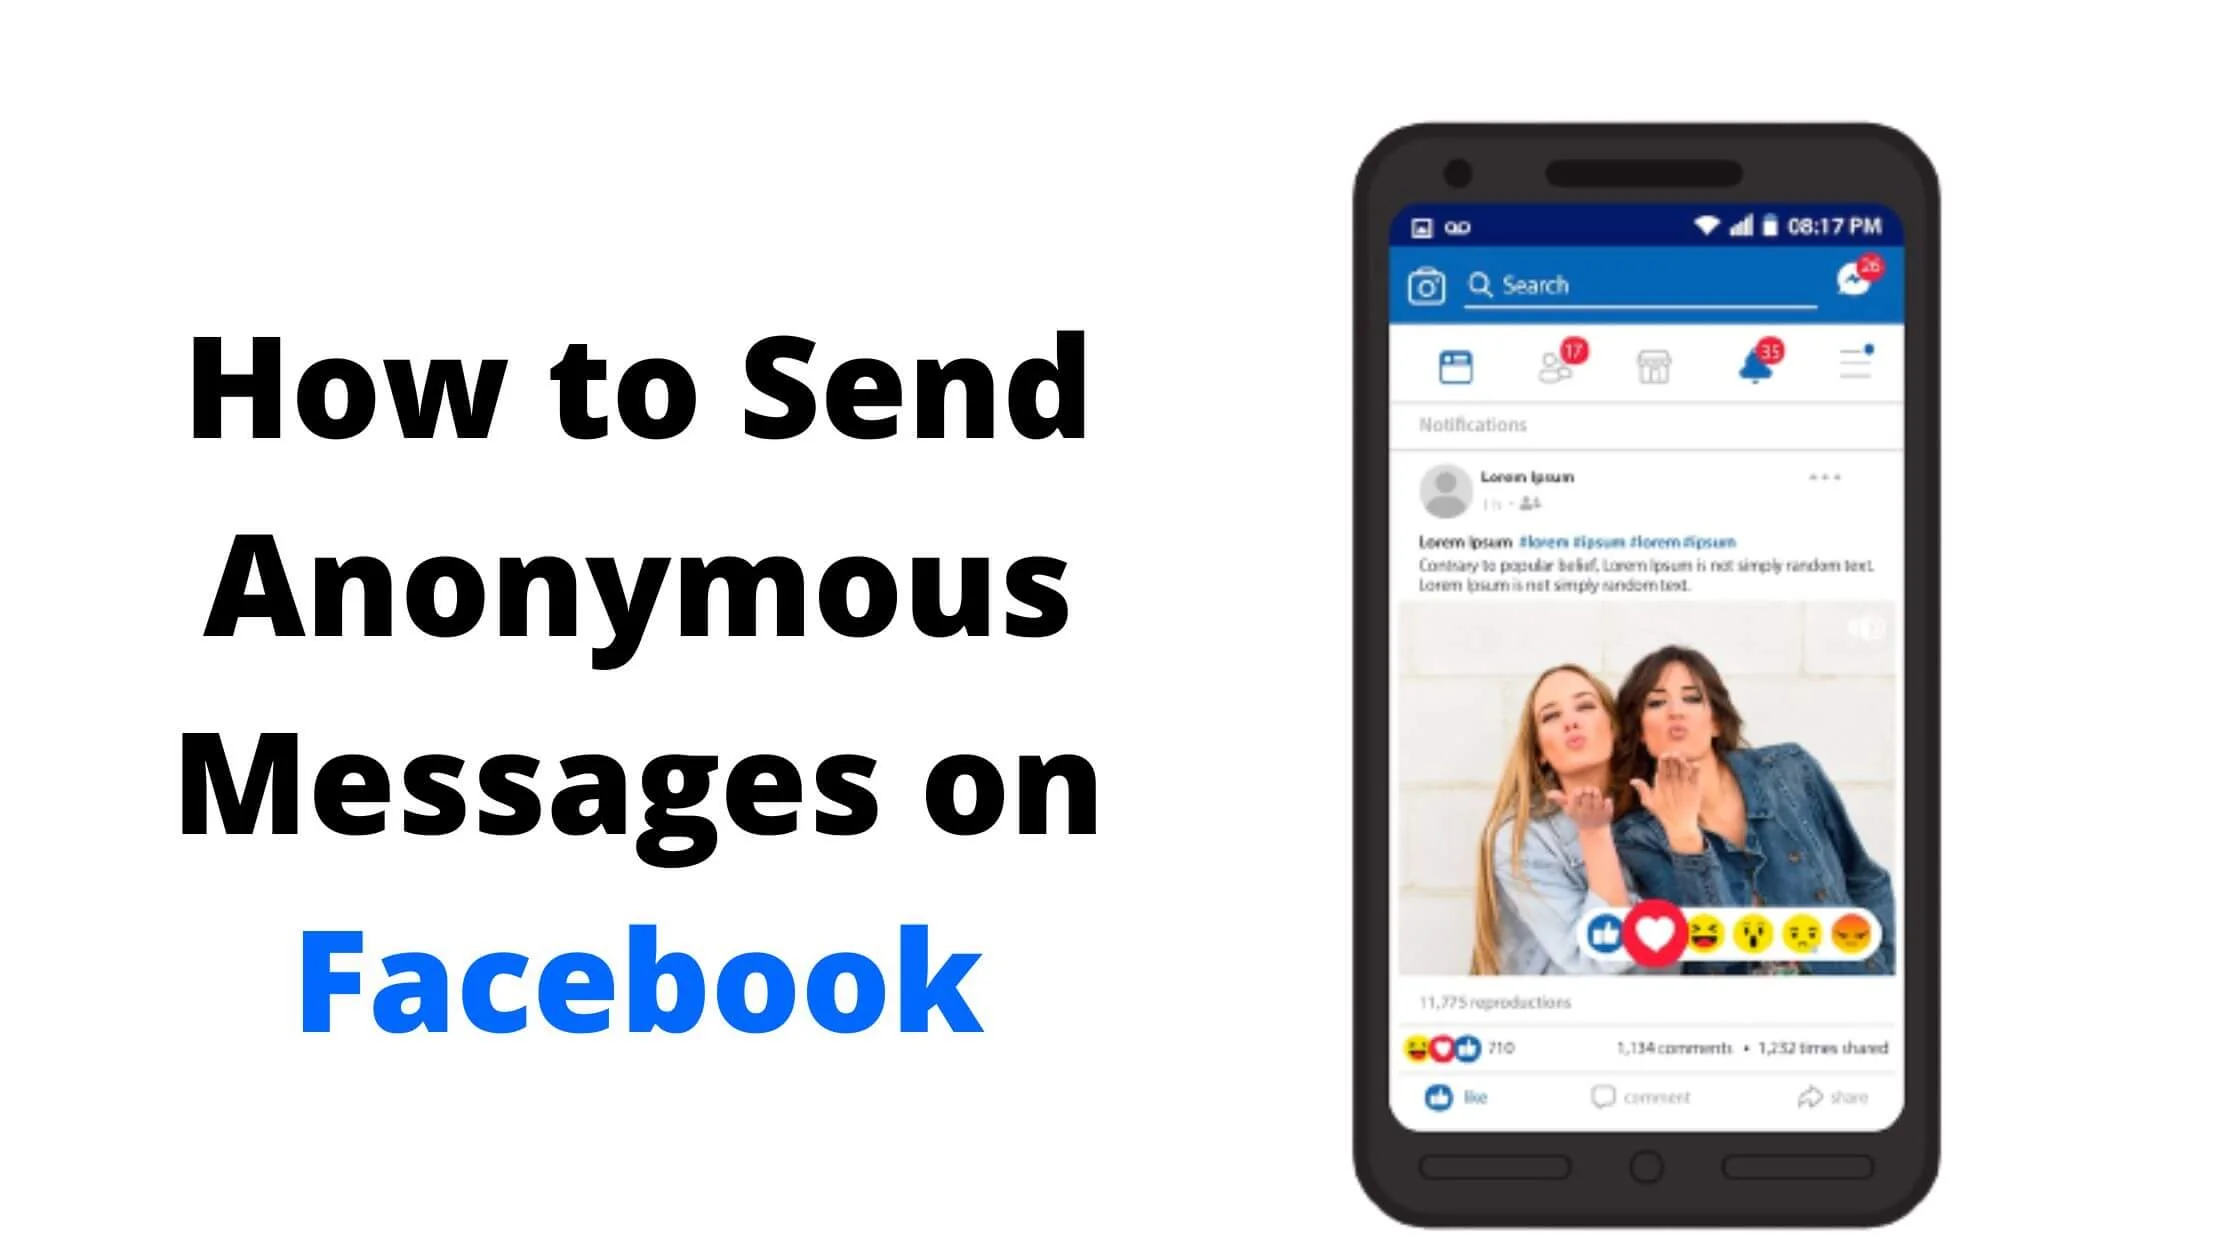 Send Anonymous Messages on Facebook